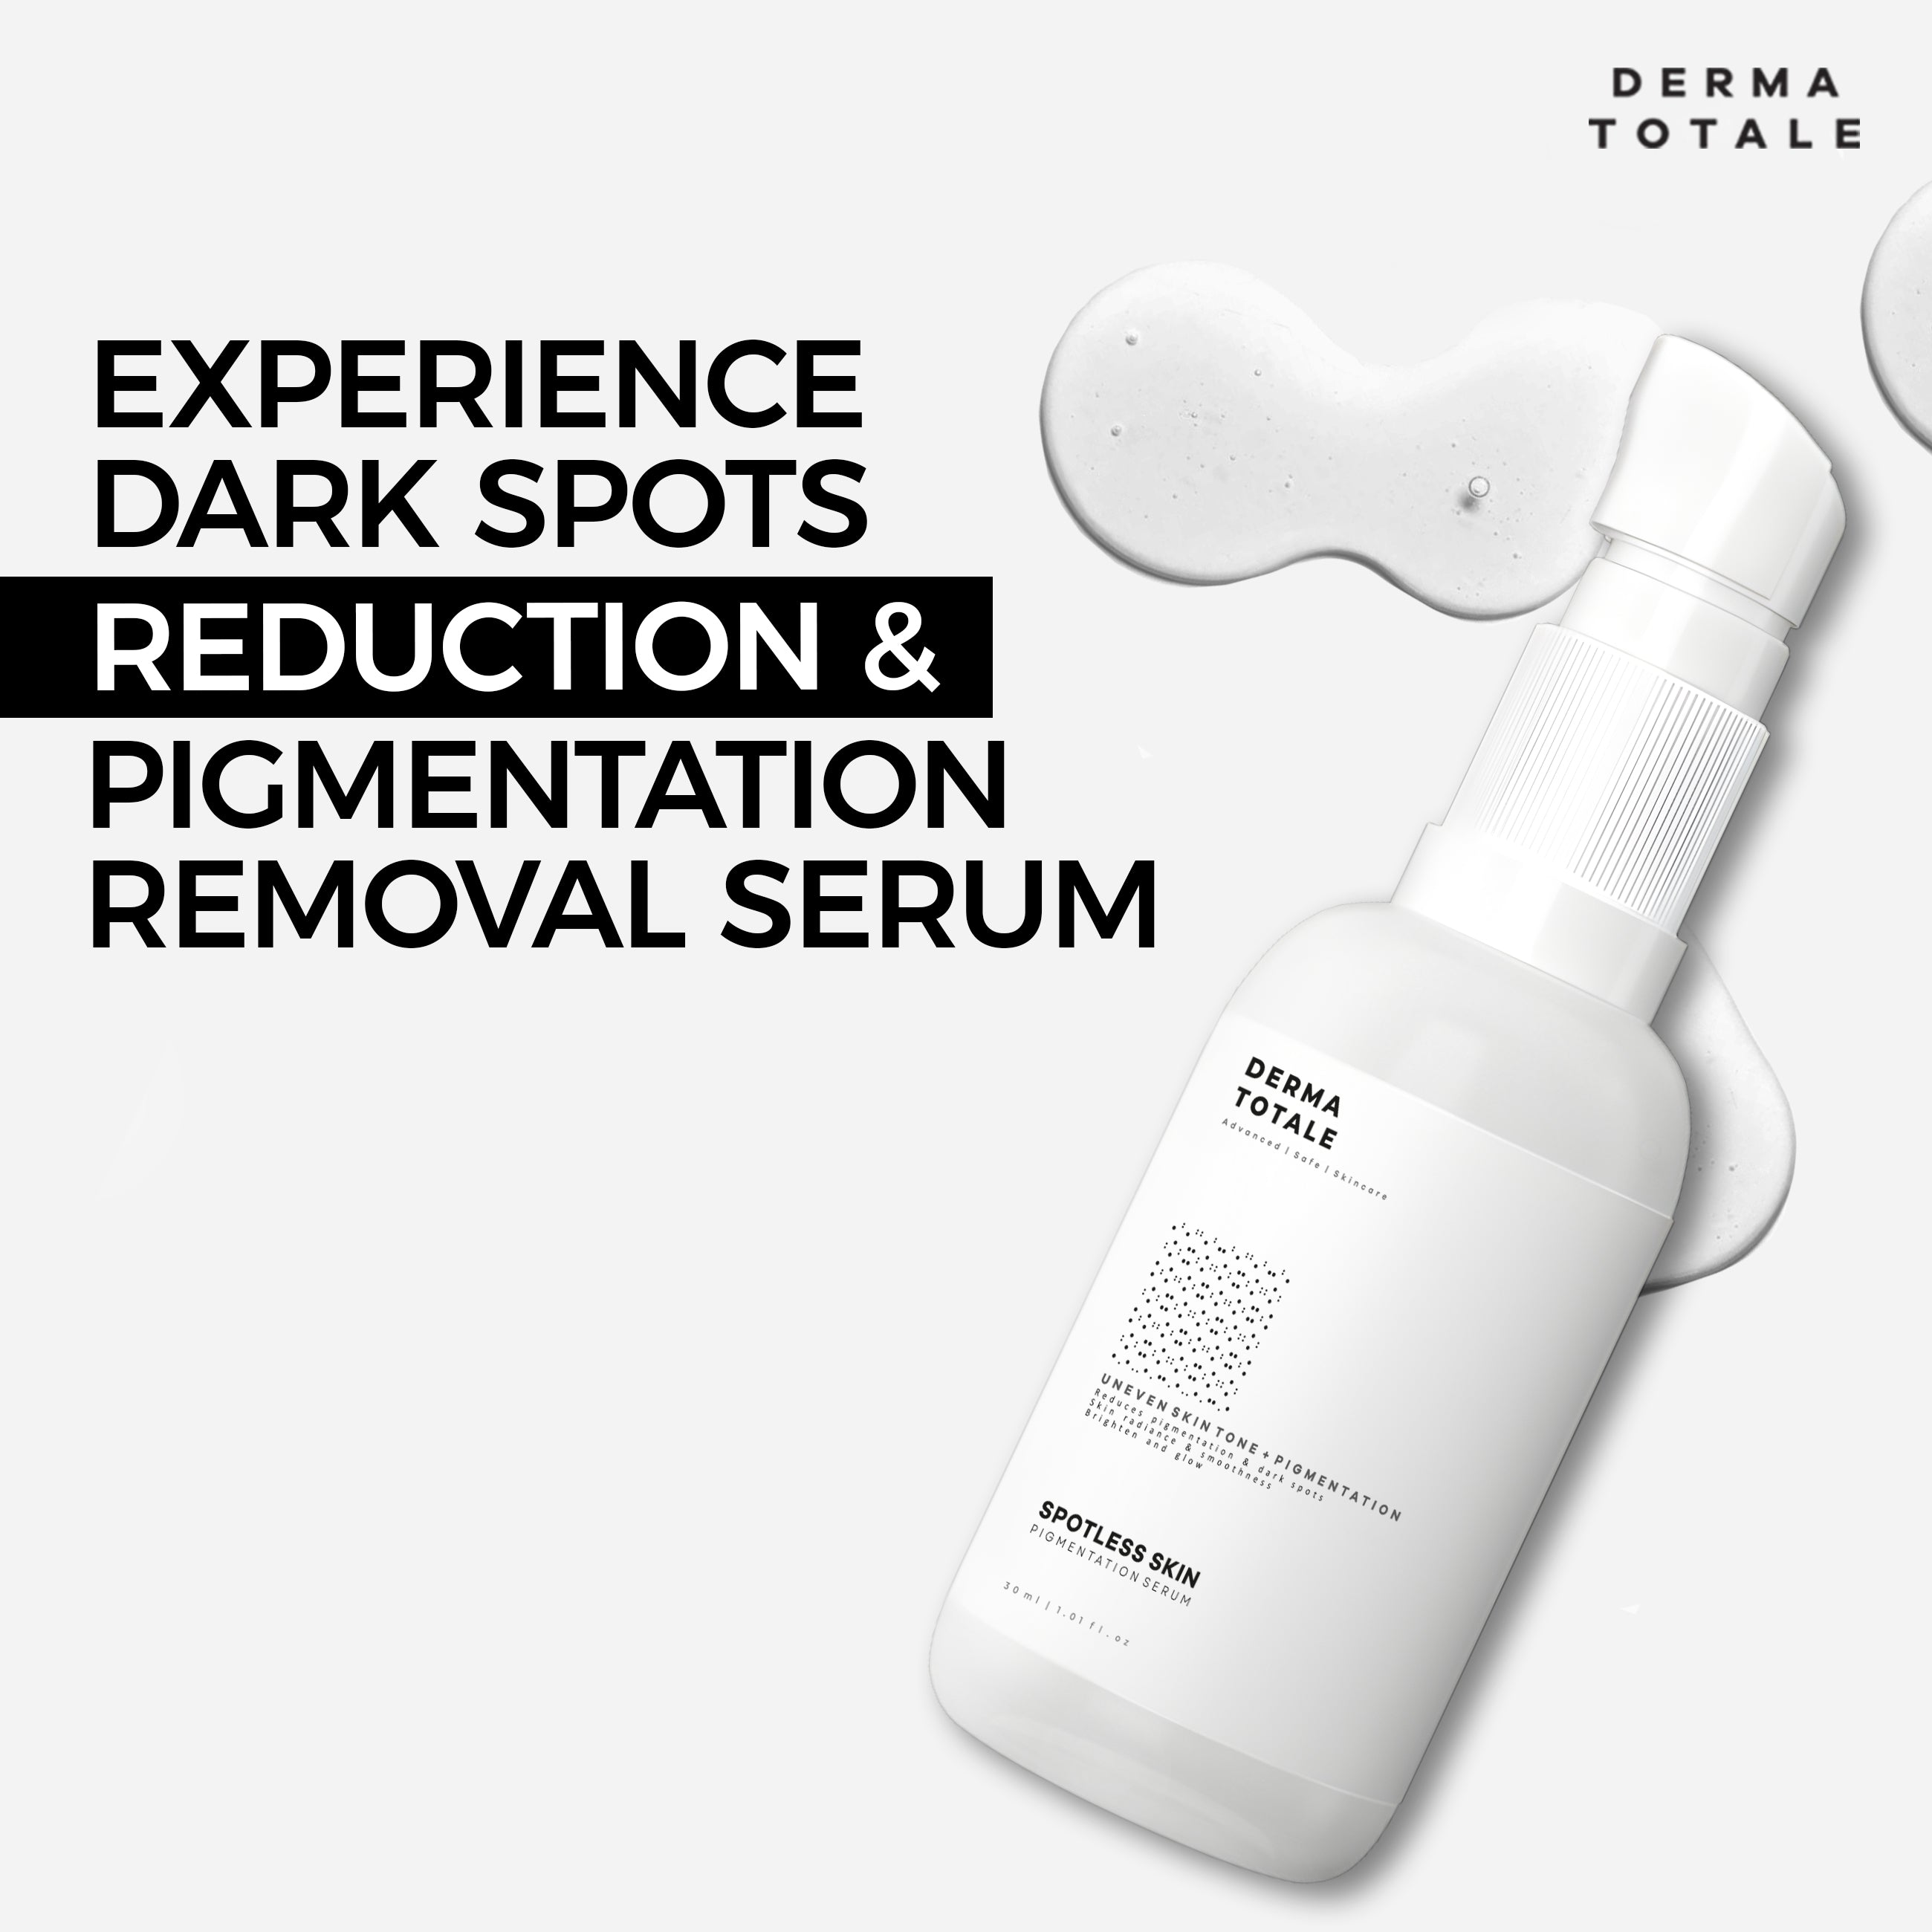 Revitalize your skin and fade pigmentation with our powerful Pigmentation Serum!